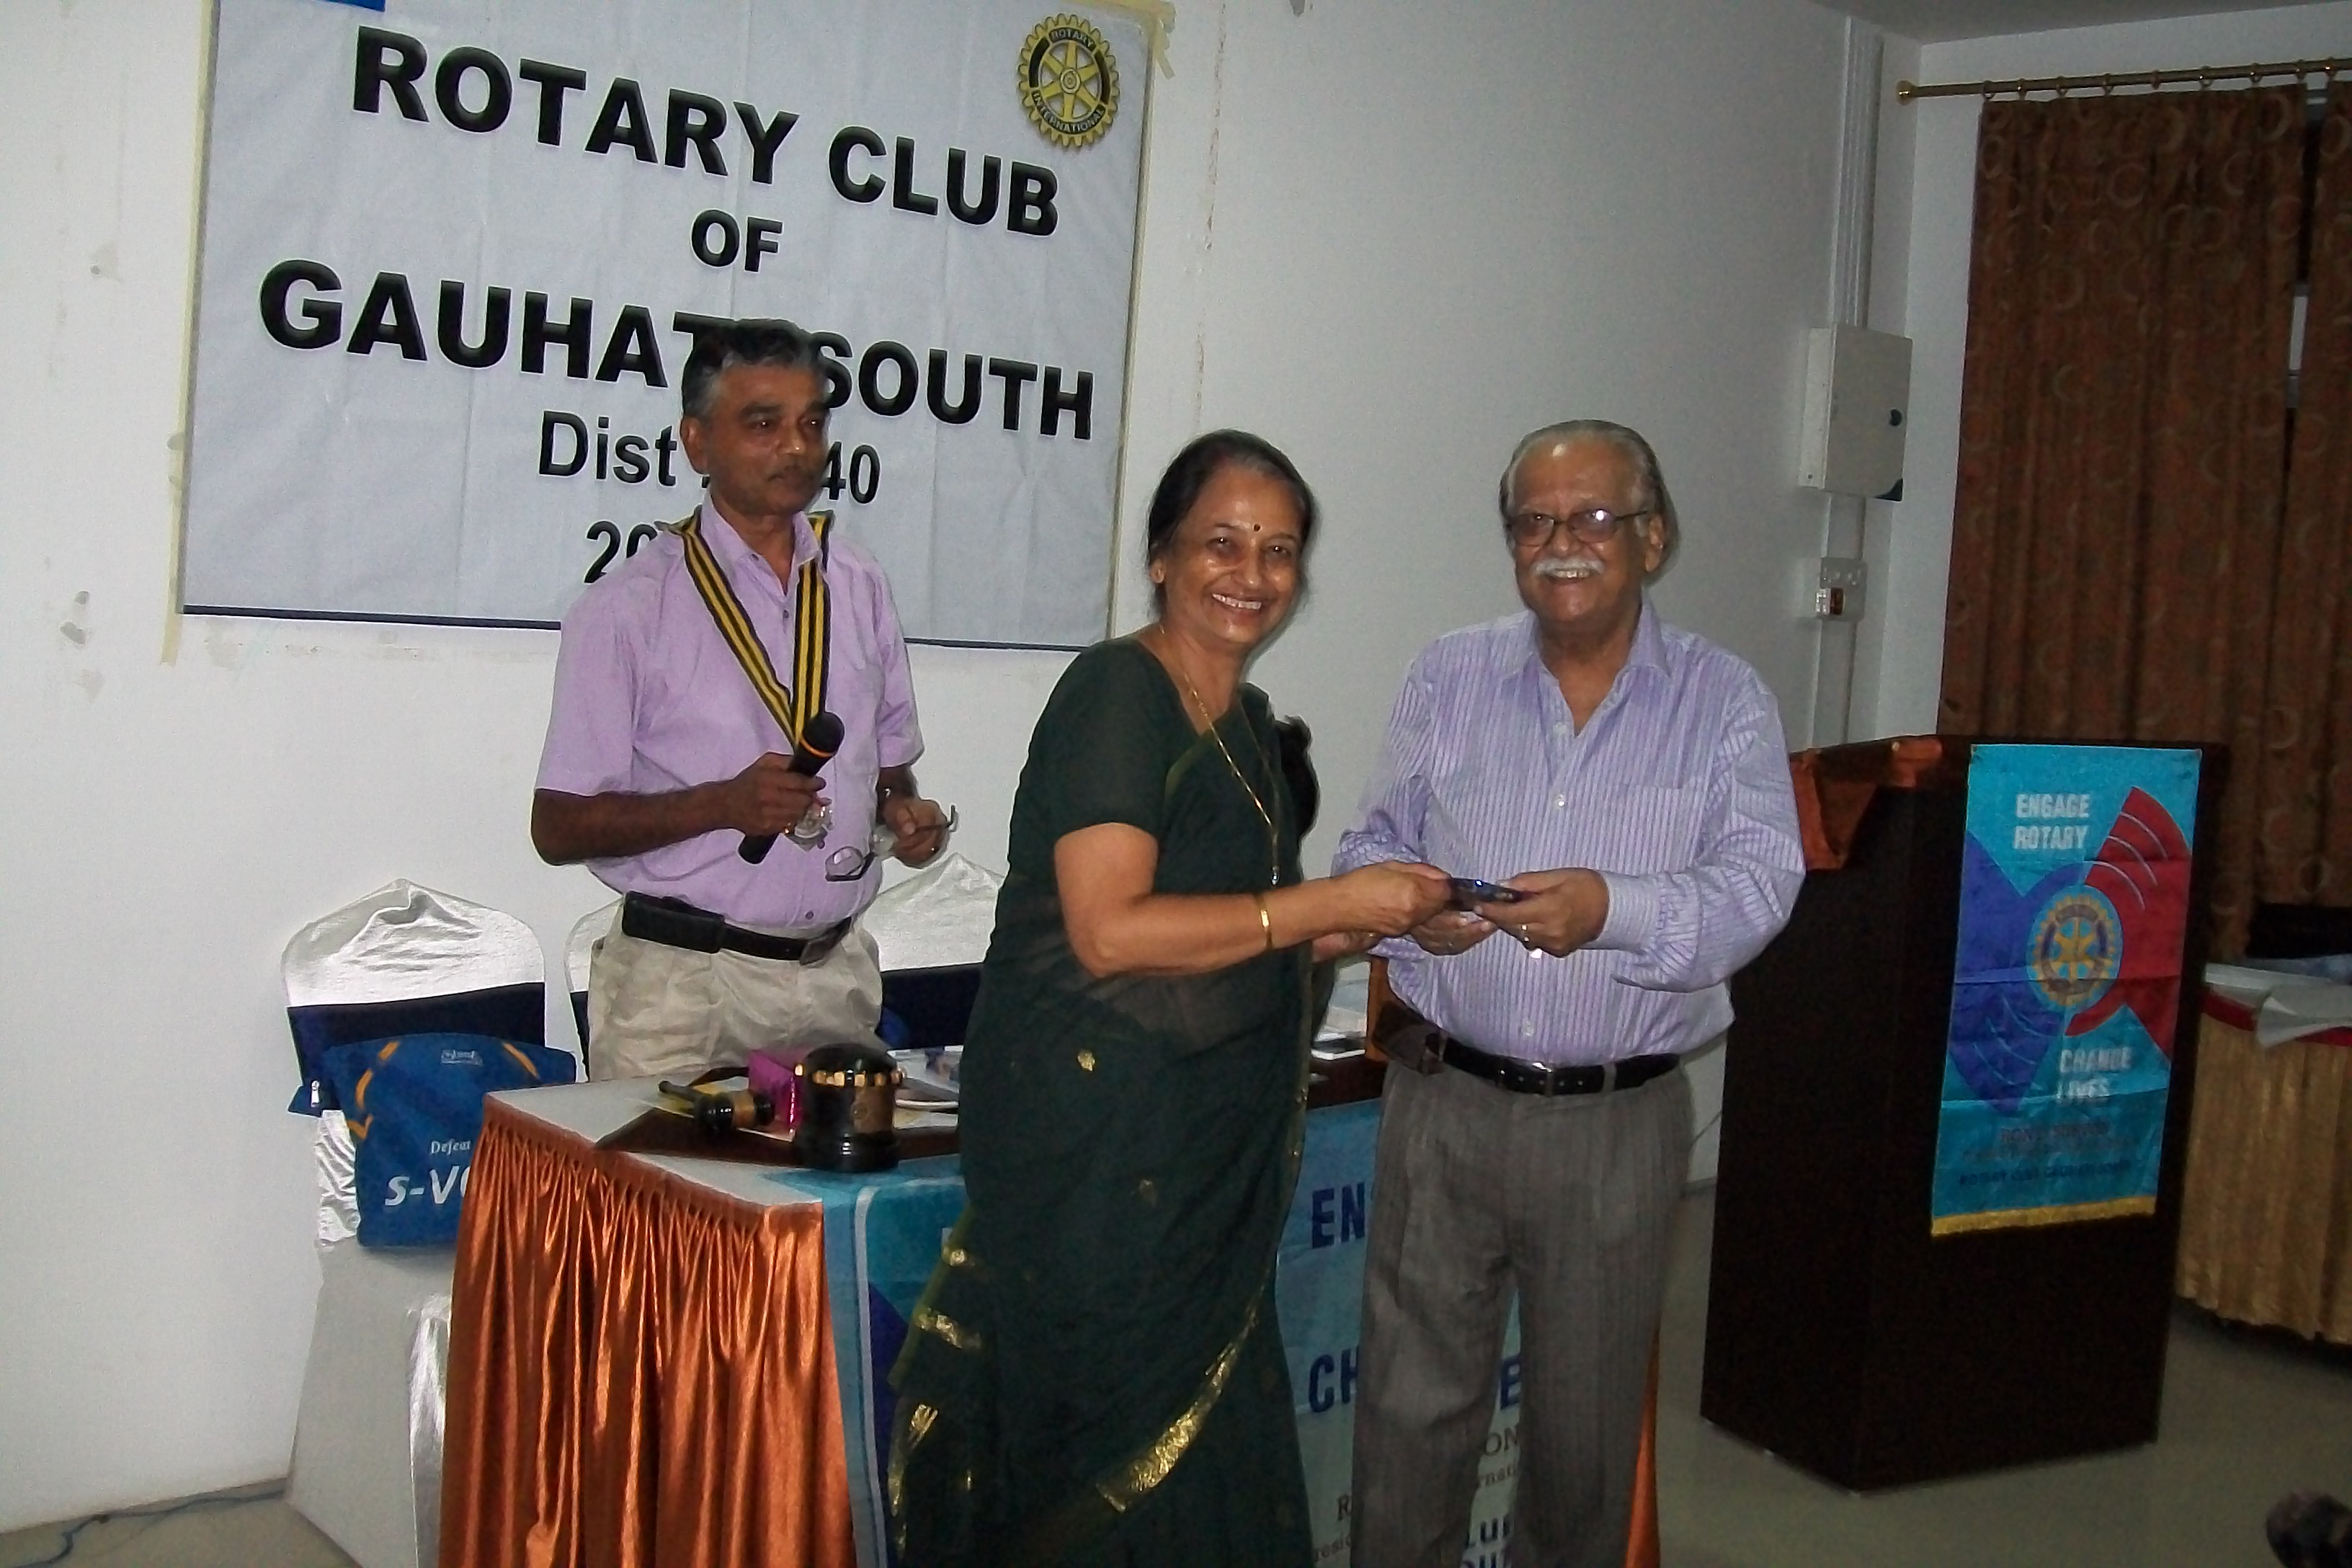  - Rtn.-Dr.-Priyam-Goswami-is-being-felicitated-on-the-occasion-of-her-Birthday-at-the-meeting-on-the-30th-Aug.-2013